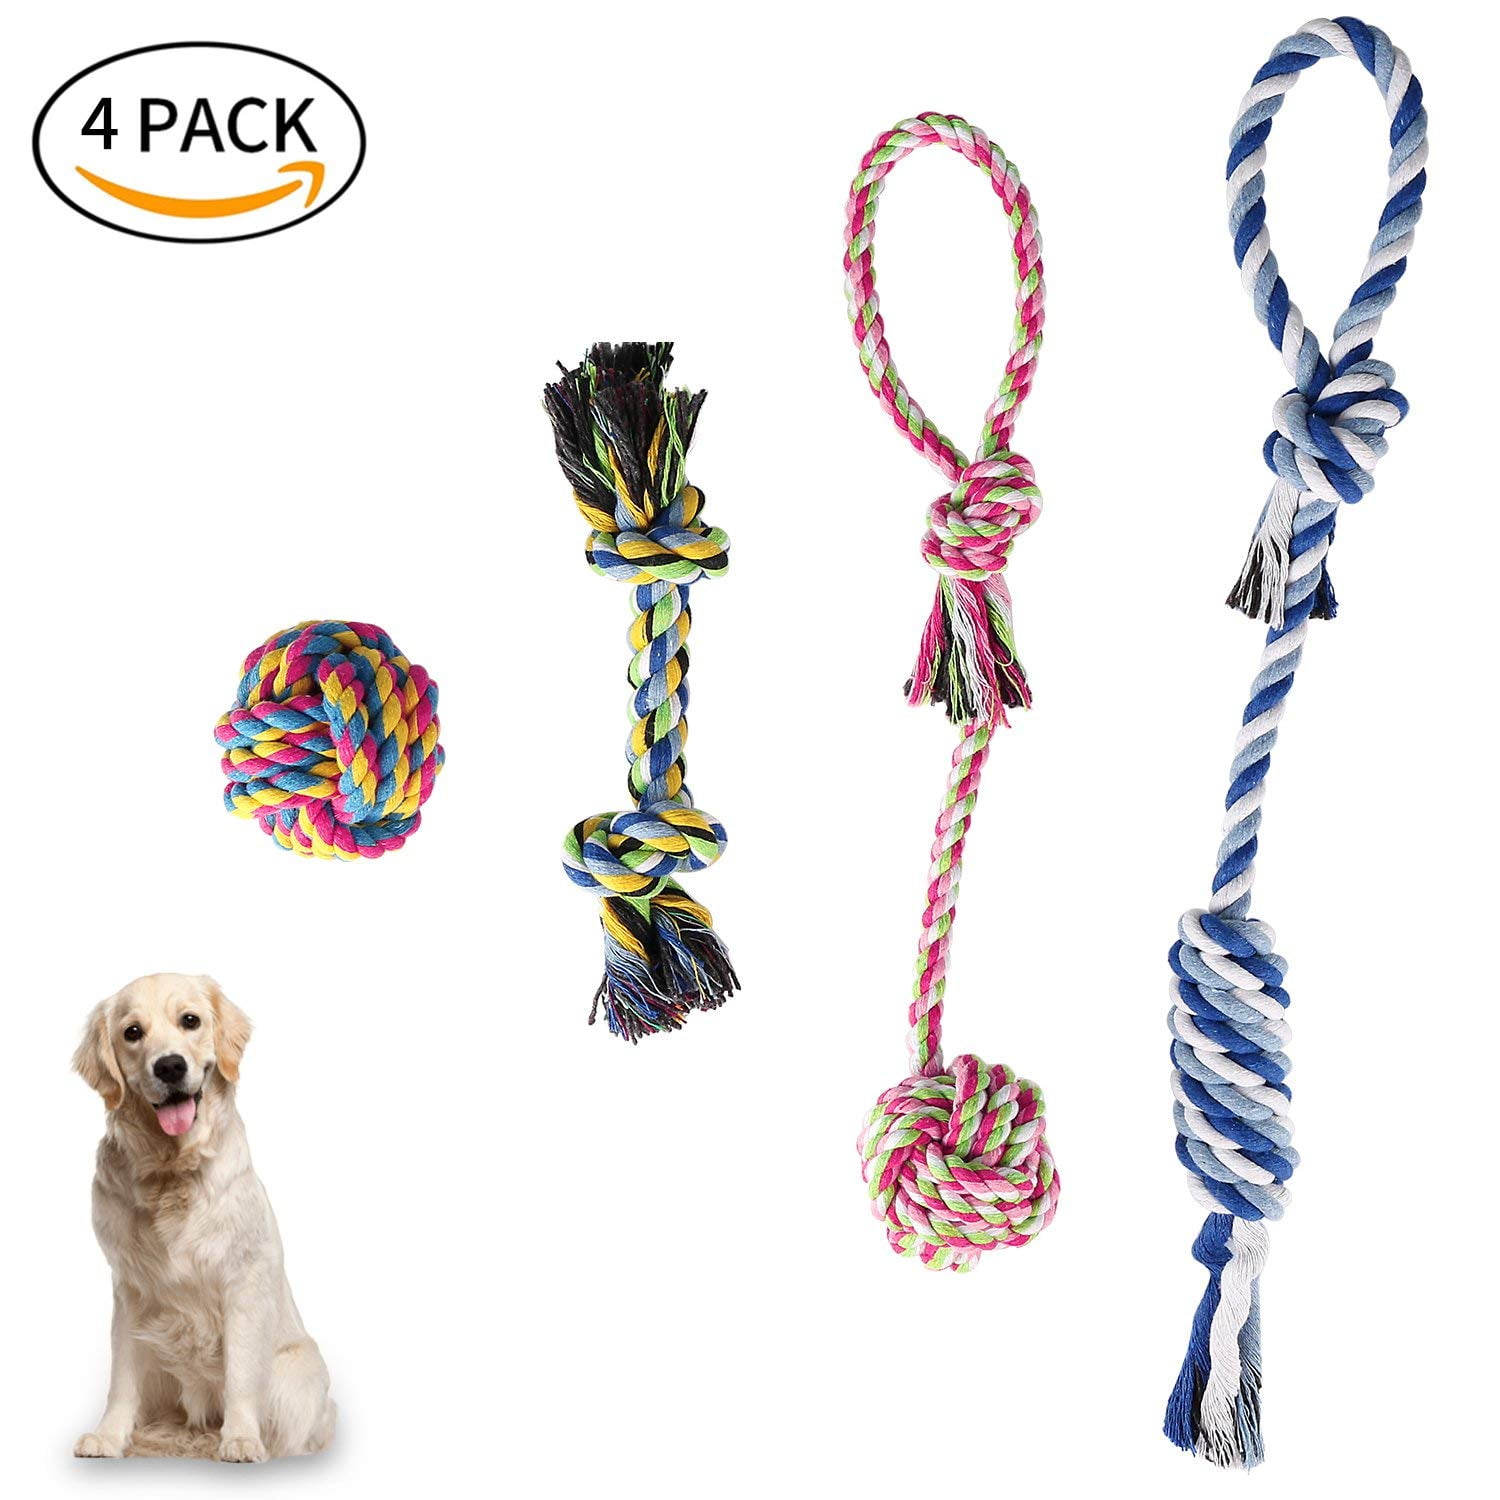 12 Pack Indestructible Dog Toys for Puppy Chewers Dog Rope Toy for Puppy Teething Interactive Tug of War Toys for Puppies Small Dogs Durable Chew Toys for Boredom Chew Teething 